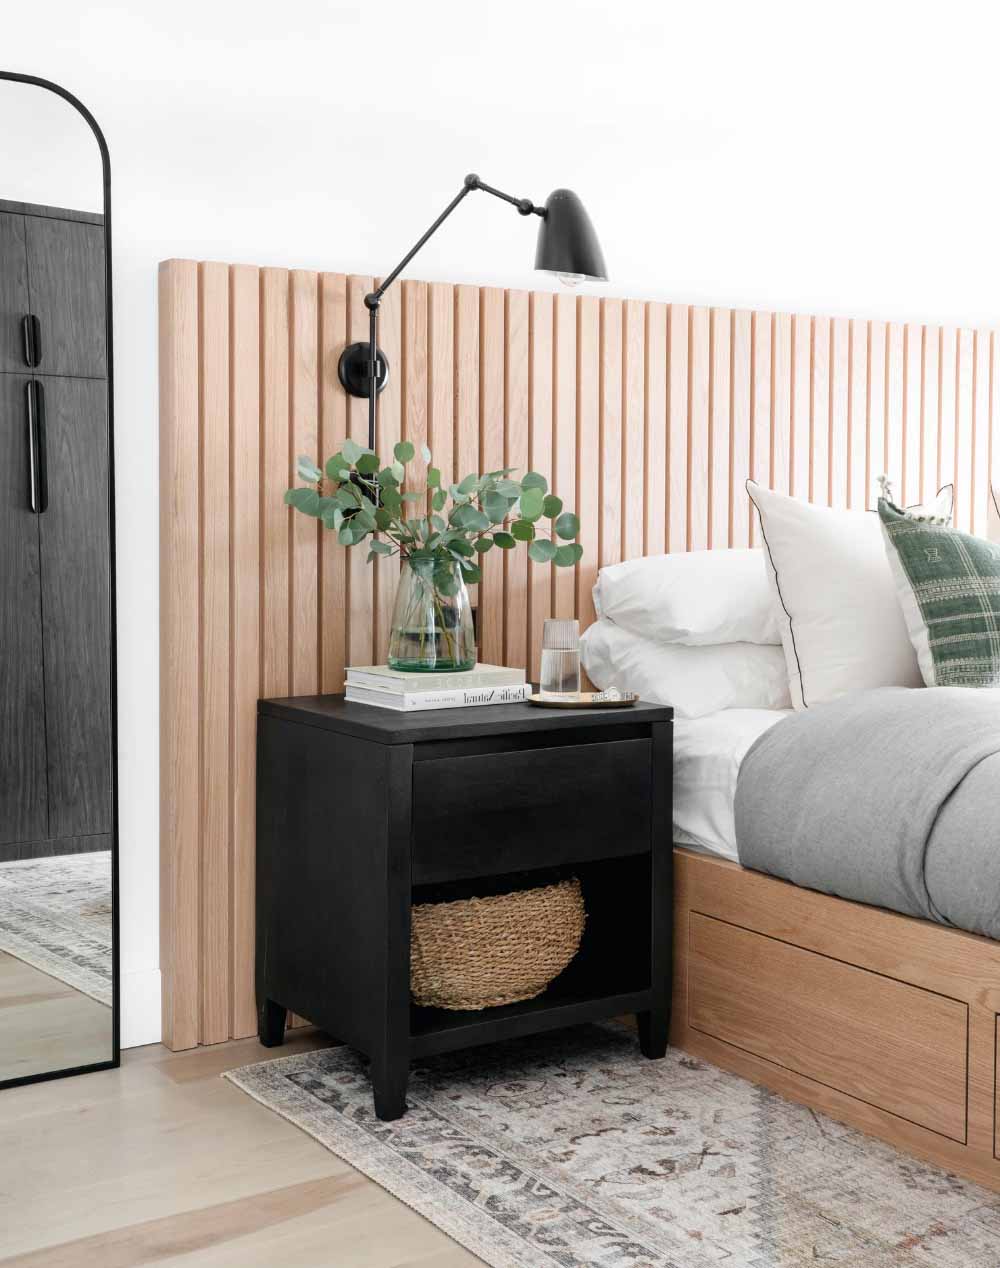 modern organic bedroom with black wall sconces and a wood slat headboard